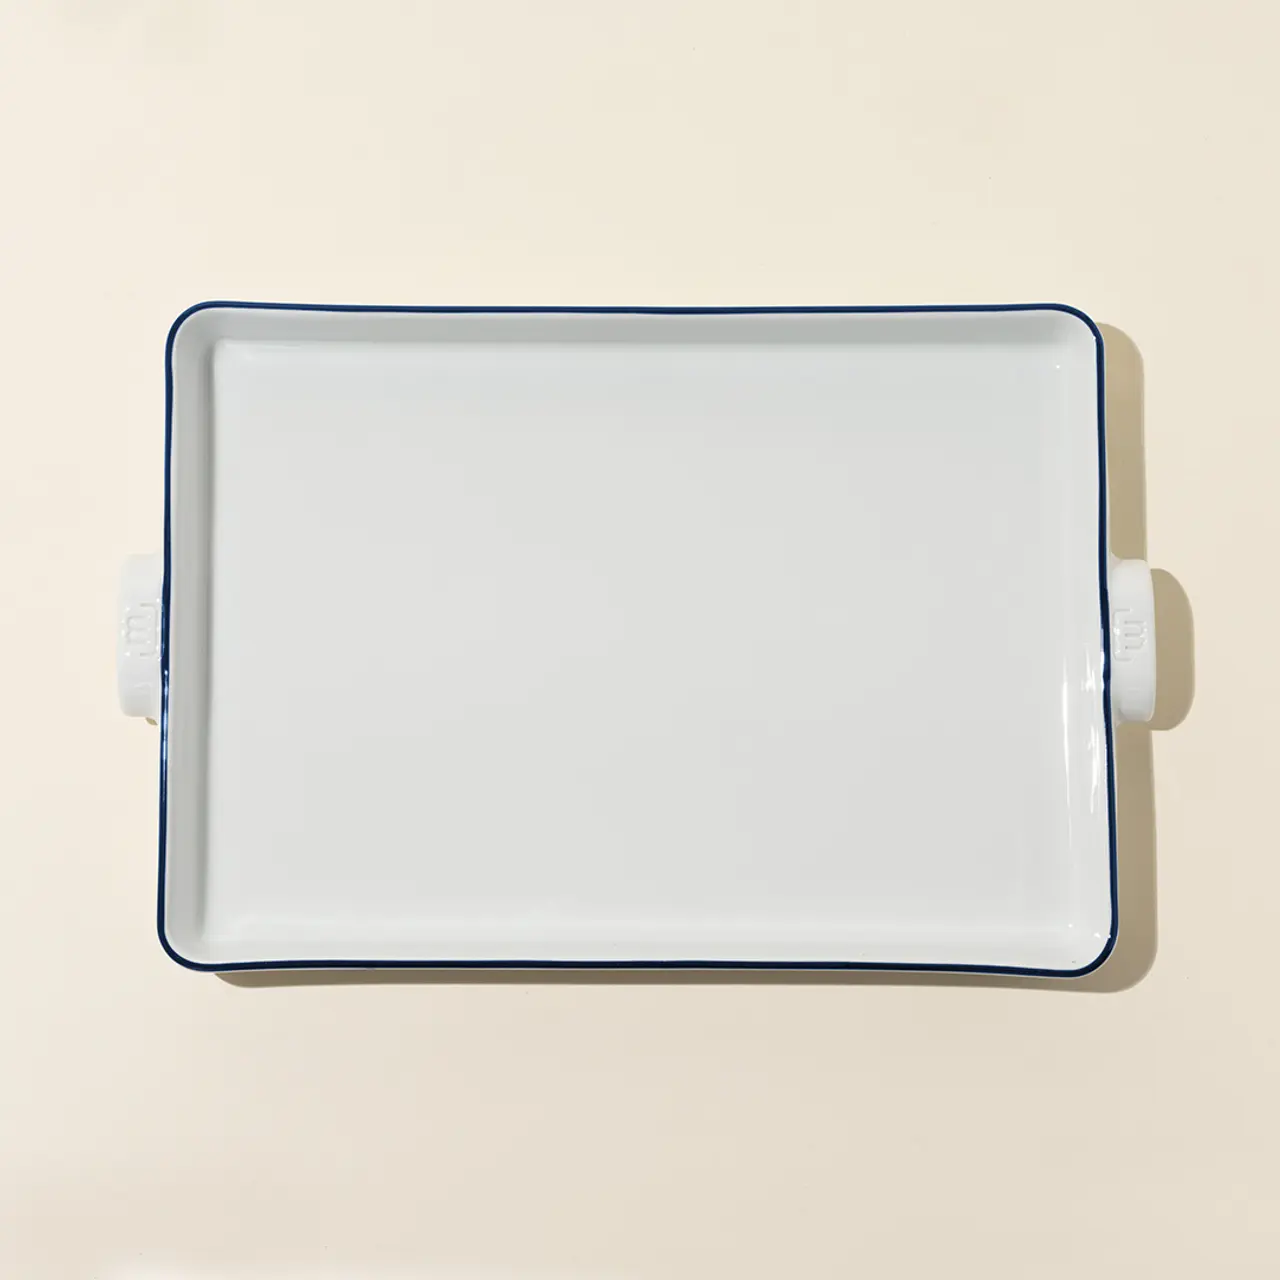 A white square plate with a blue rim and small handles on two sides sits on a plain surface.